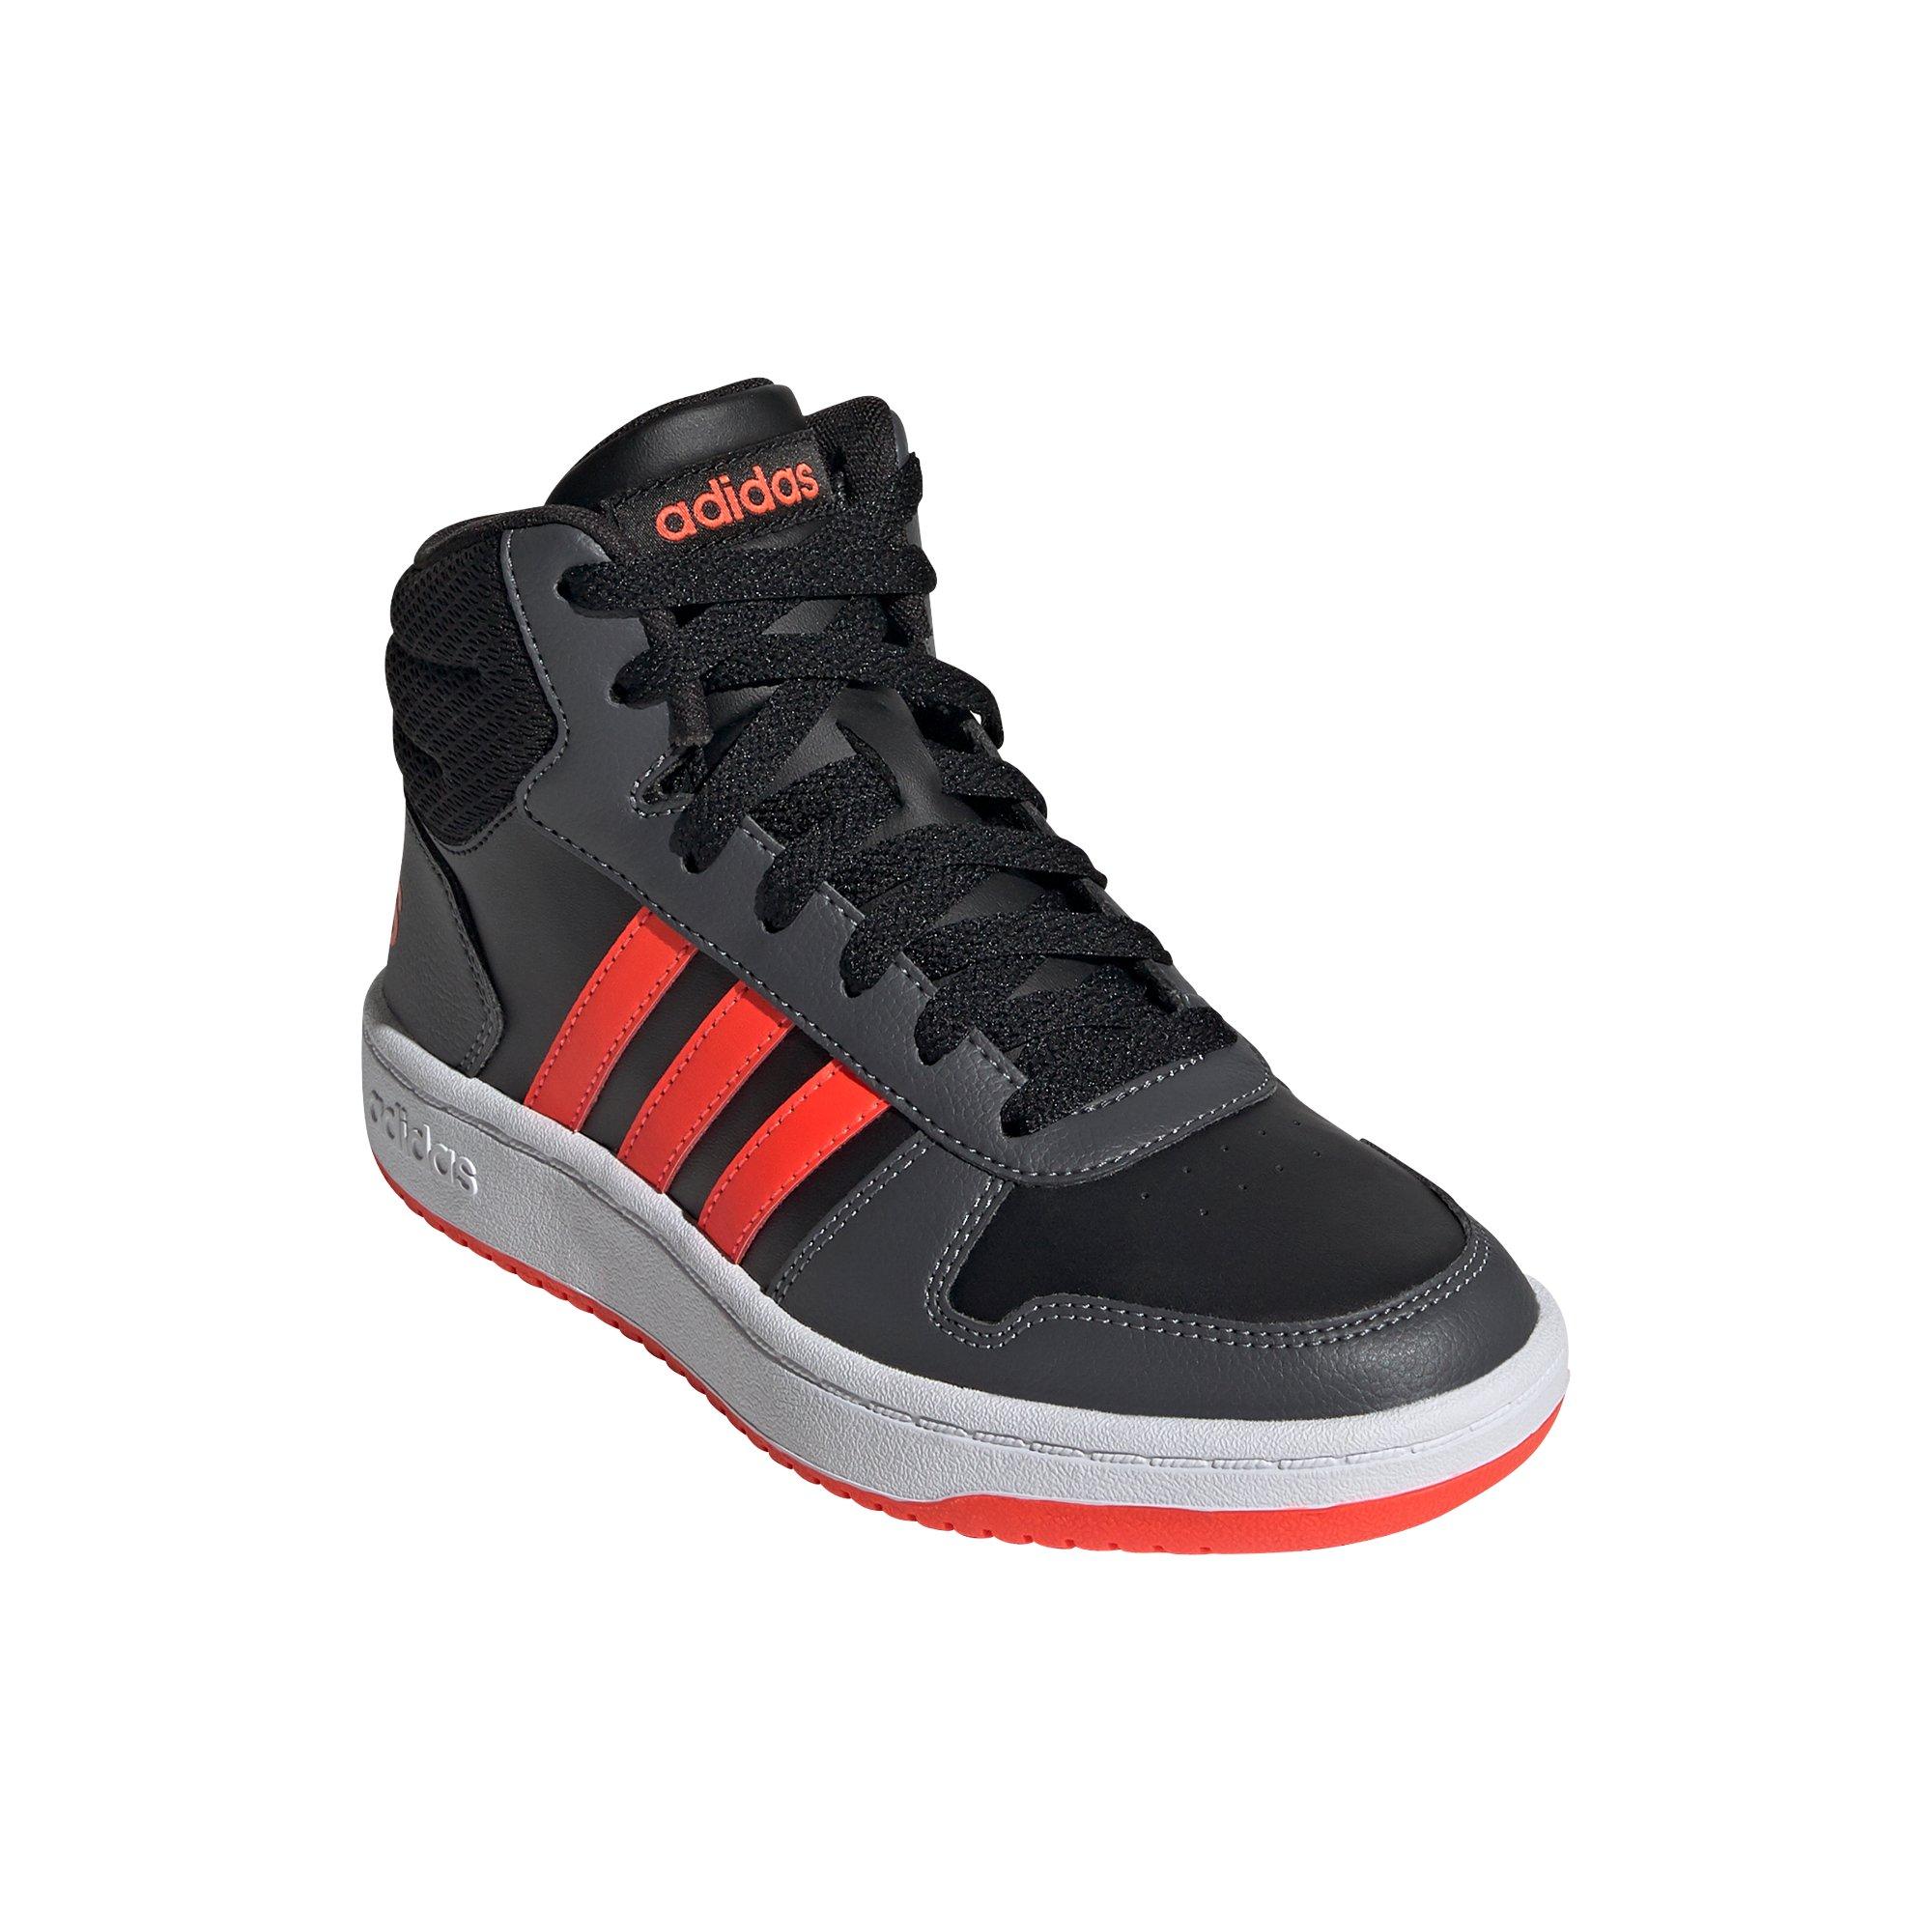 Adidas Youth LVL 029002 Gray/Red Basketball Athletic 2.5 Excellent Preowned